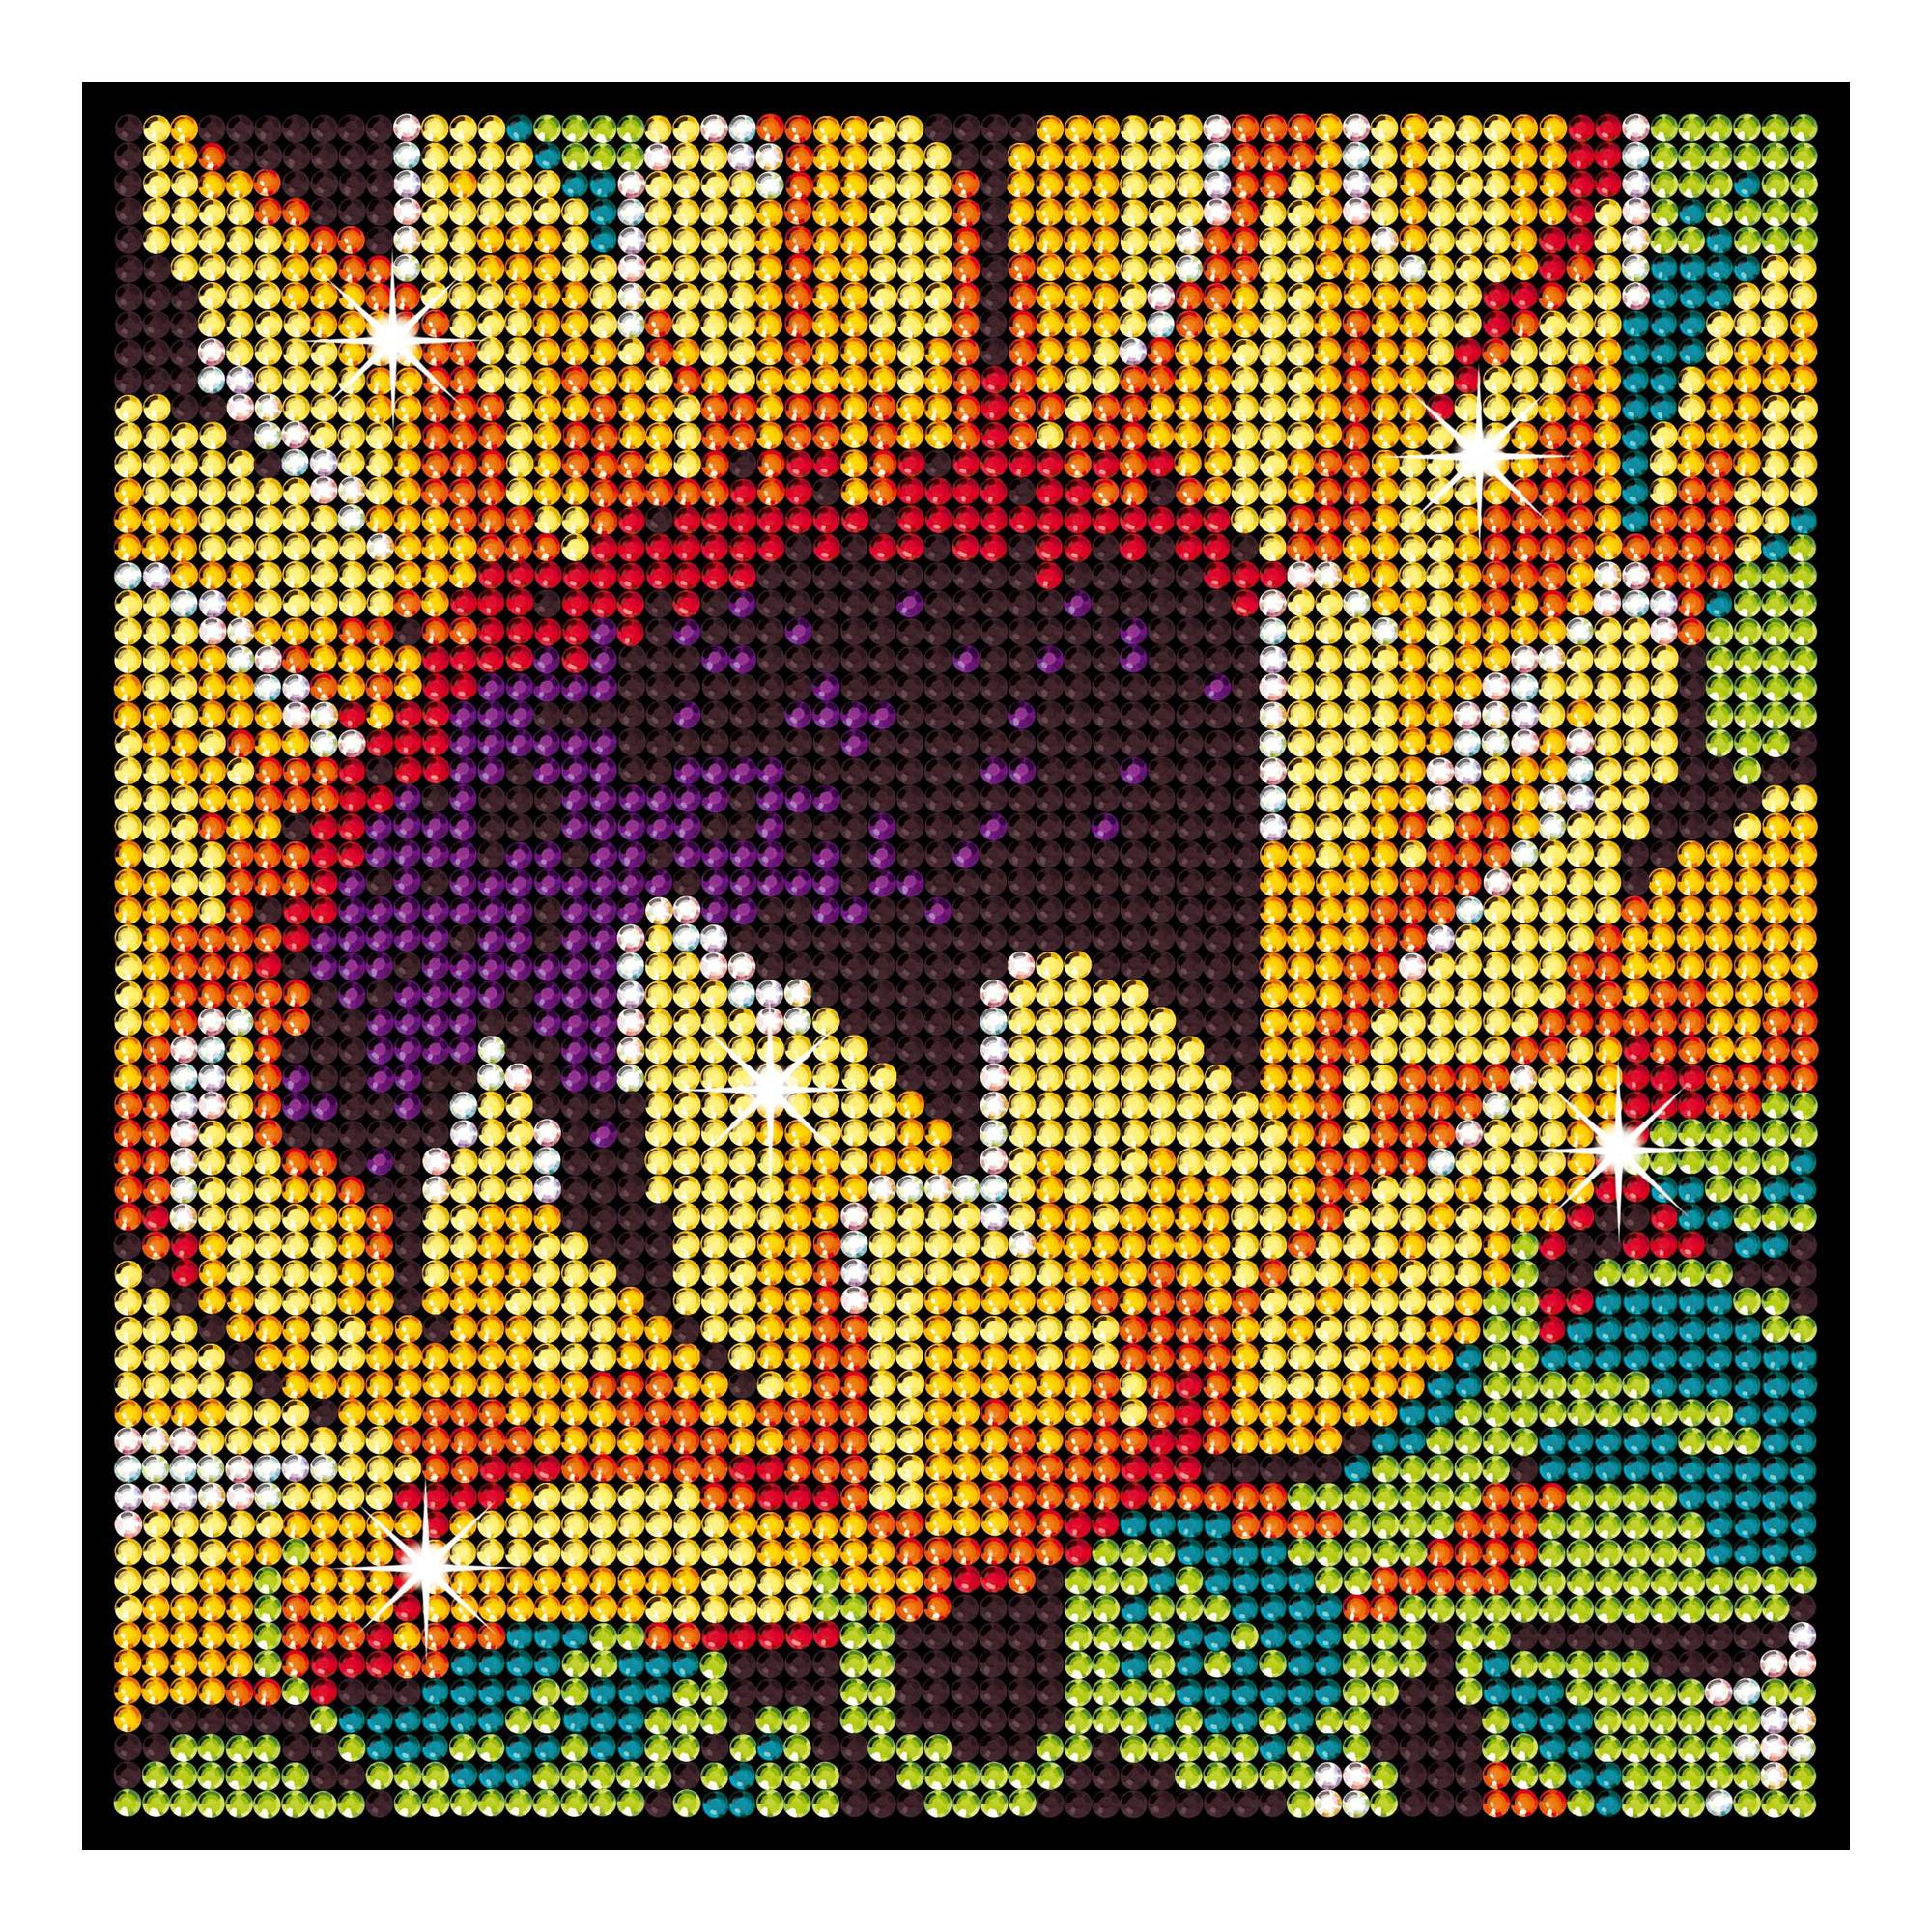 Diamond Art | 5D Diamond Painting Kits | Abstract Sunflower House Kit with  28-Facet, Resin Square Diamonds, Thick Canvas Plus Tools | DIY Crafts for